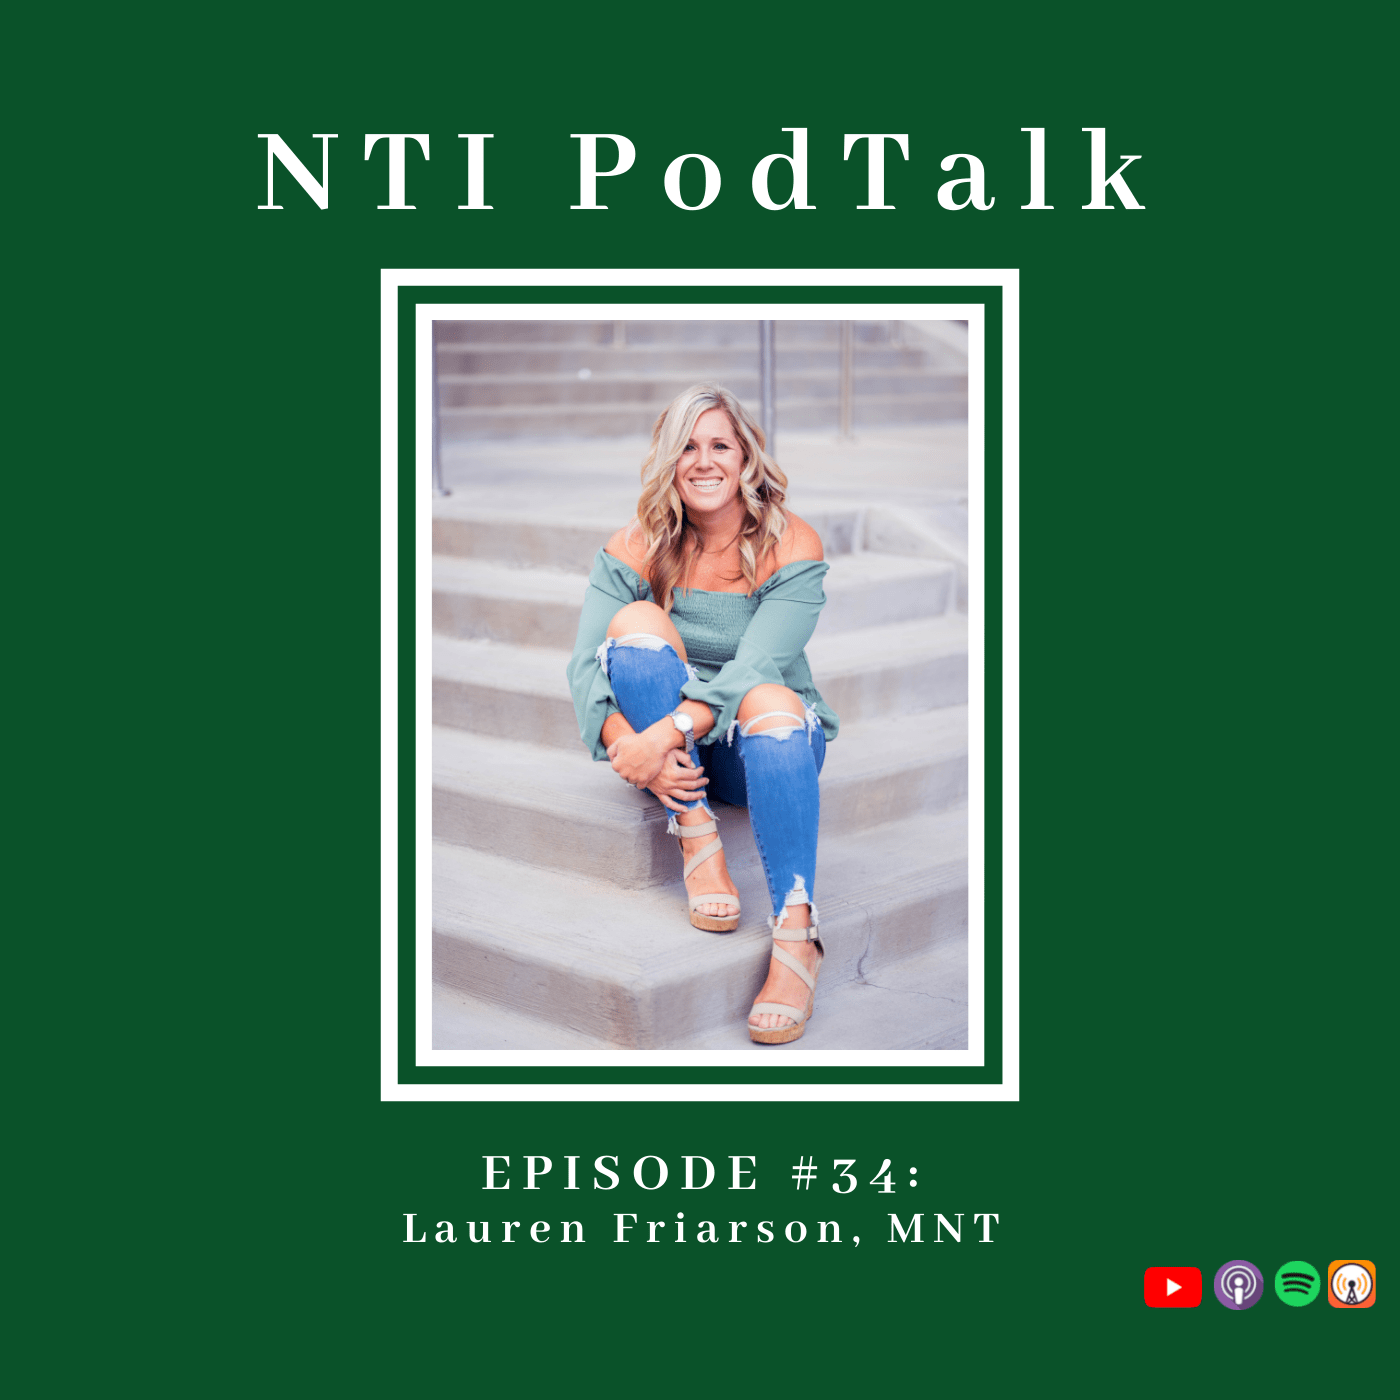 Featured image for “NTI PodTalk with Instructor, Lauren Friarson, MNT”